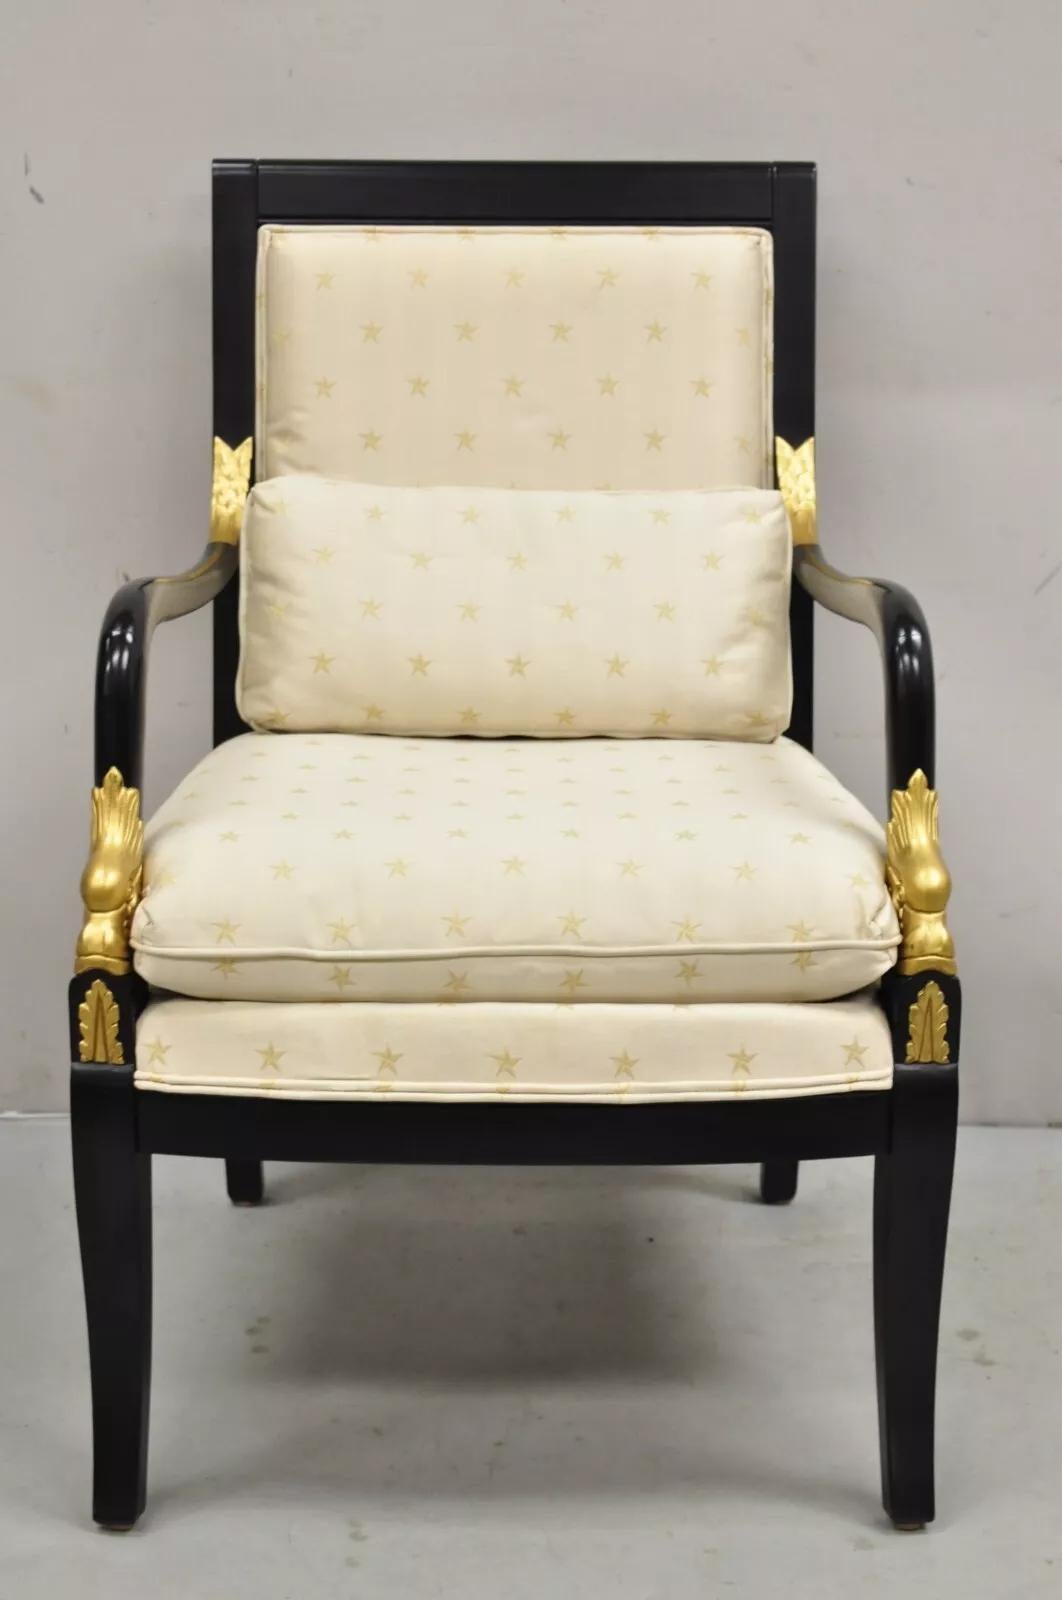 Ethan Allen French Empire Style Black Lacquer Gold Dolphin Upholstered Arm Chair. Circa Late 20th Century. Measurements: 37